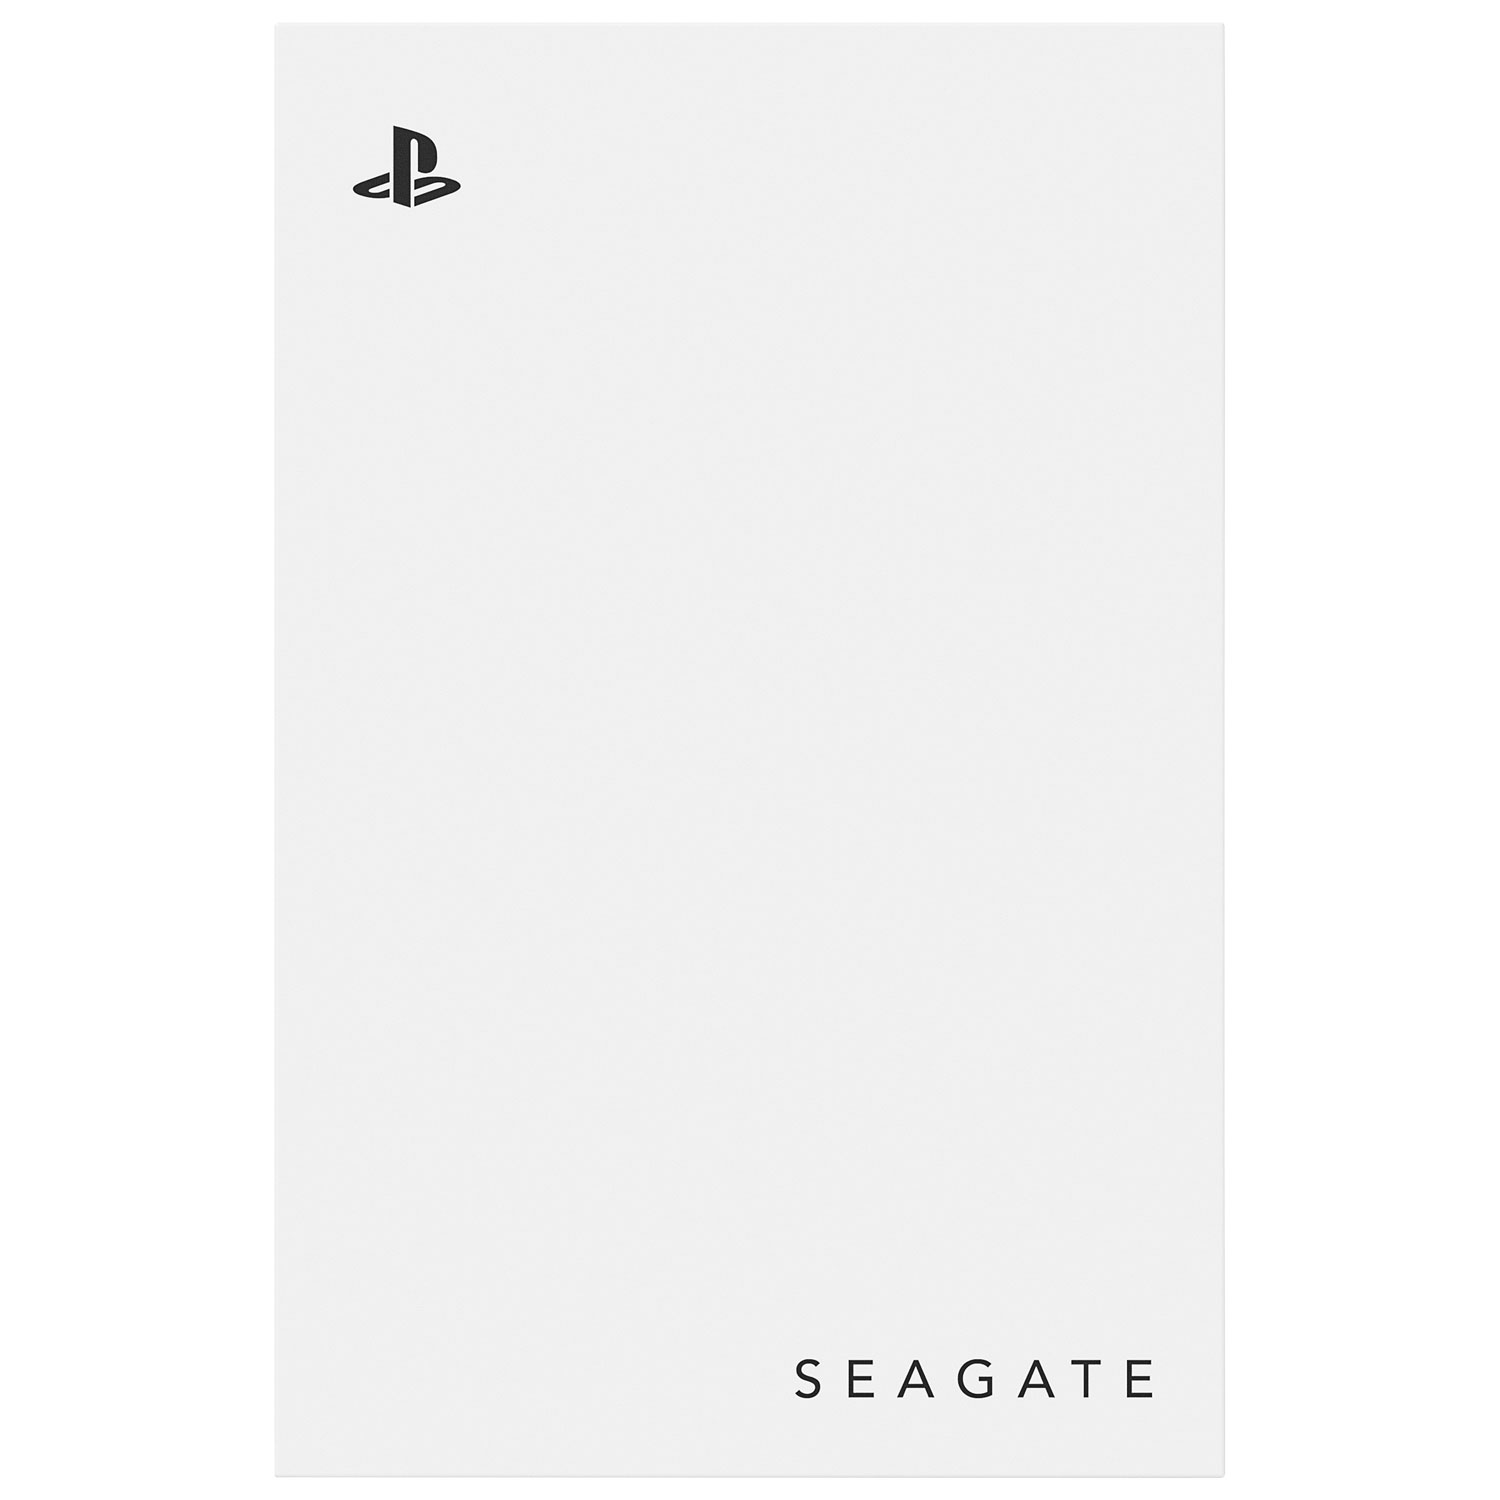 Seagate 2TB USB 3.0 External Hard Drive for PlayStation (STLV2000101) - White